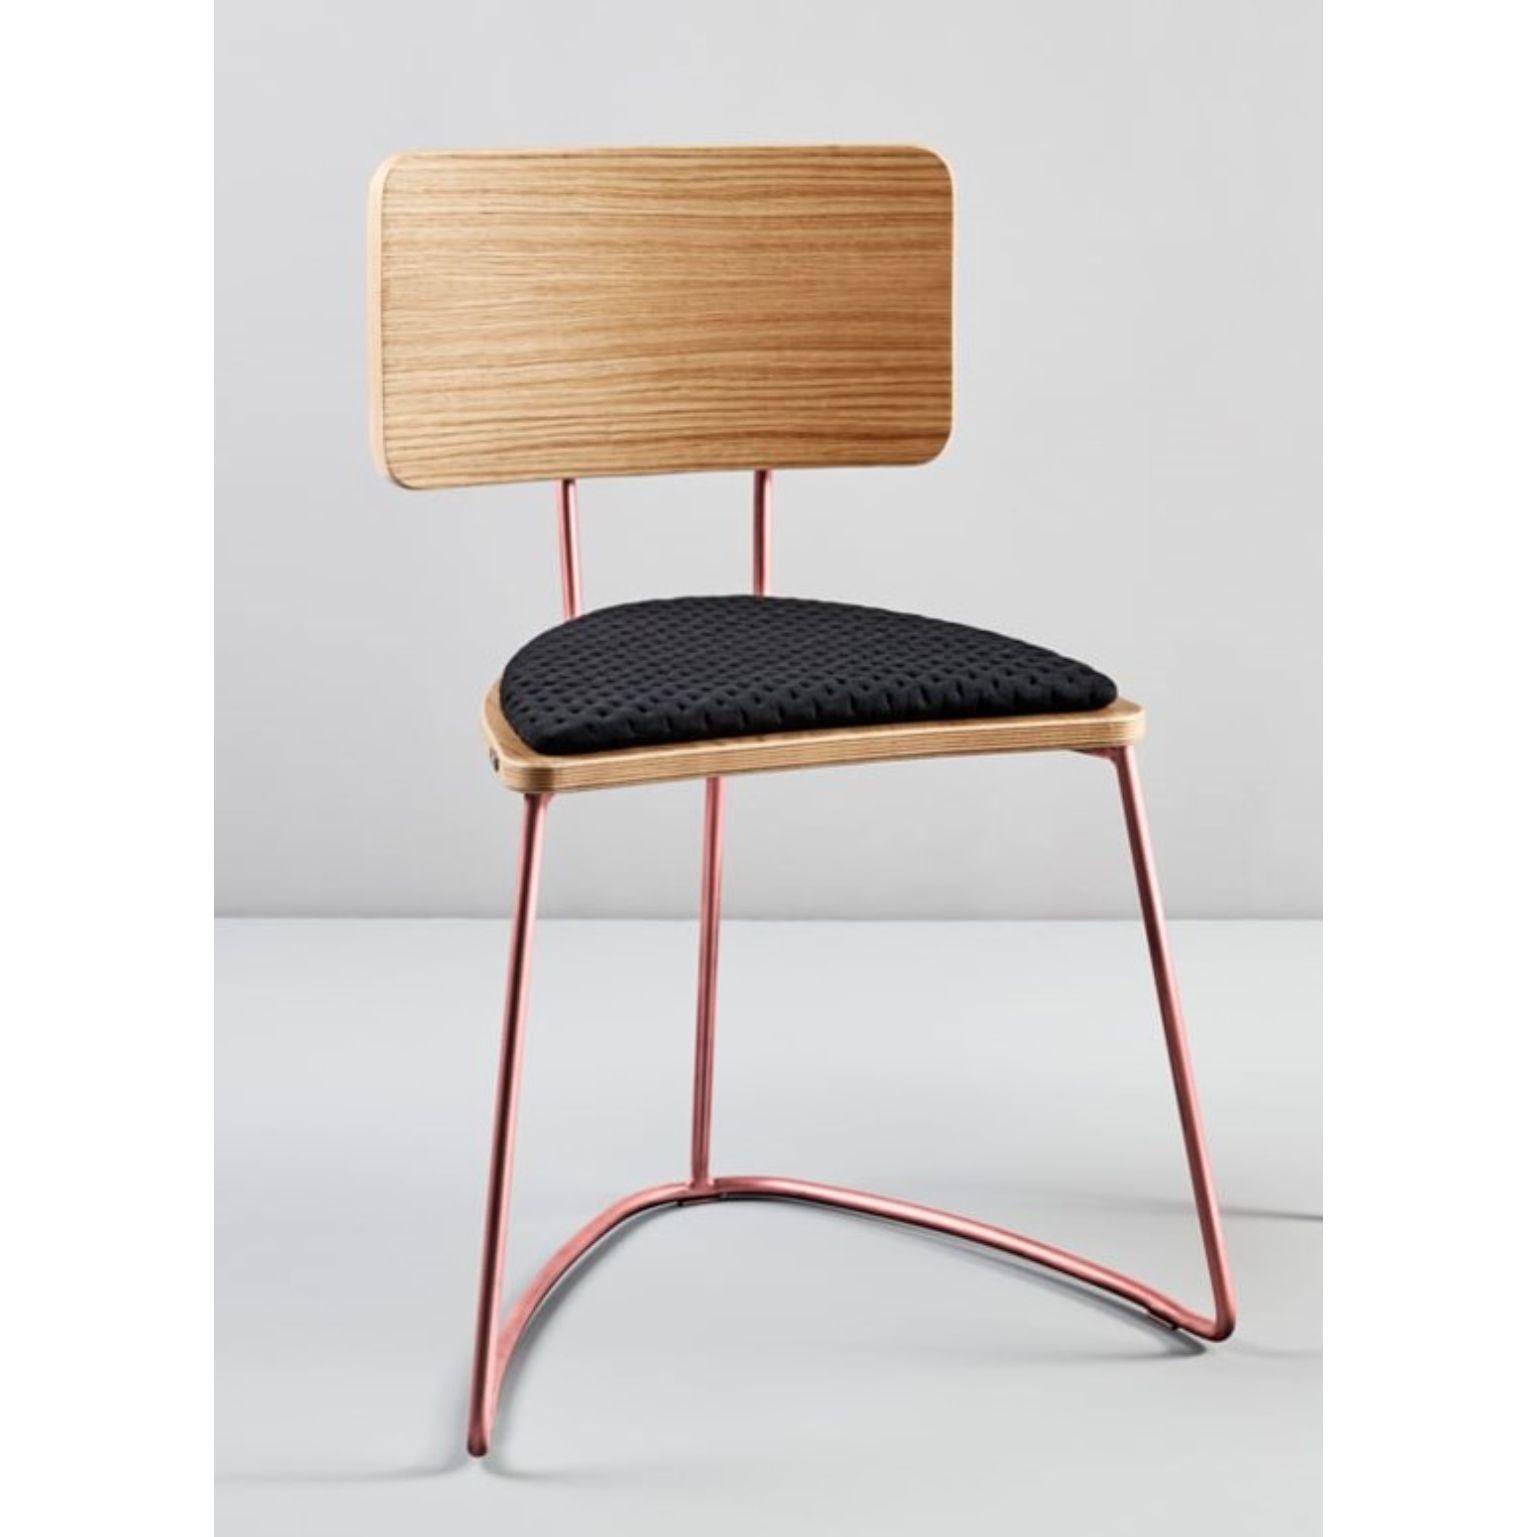 Boomerang chair, black by Pepe Albargues
Dimensions: W54, D54, H76, Seat 46
Materials: Paint coated iron structure / gold / copper or chromed iron structure
Plywood backrest and seat covered with a natural oak wood layer
Upholstered seat